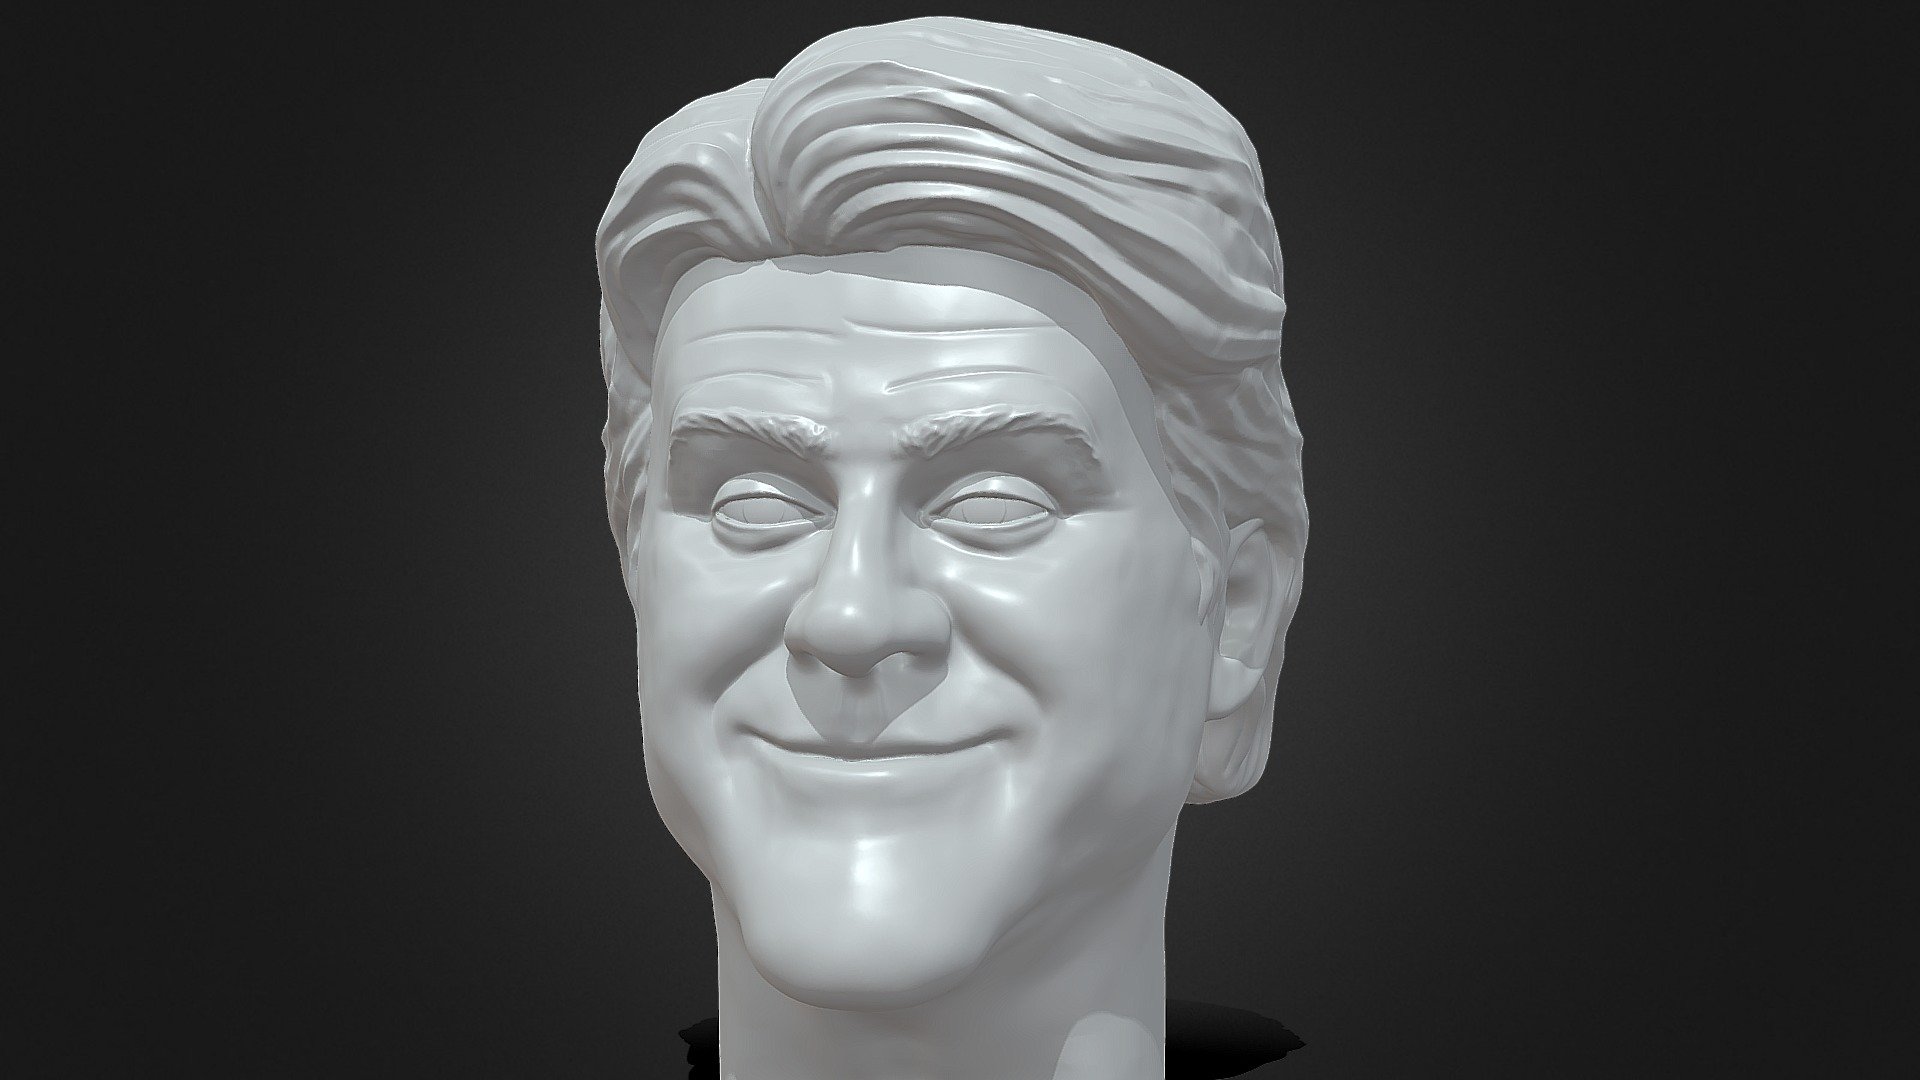 Jay Leno digital portrait sculpture. Likeness sculpt from his 90's era. 3D model is 3D printable.

Included is also stl file of the head without neck for action figures scaled to mattel elite size.

Browse my store to see more of my work.

Message if interested to commission me 3d model